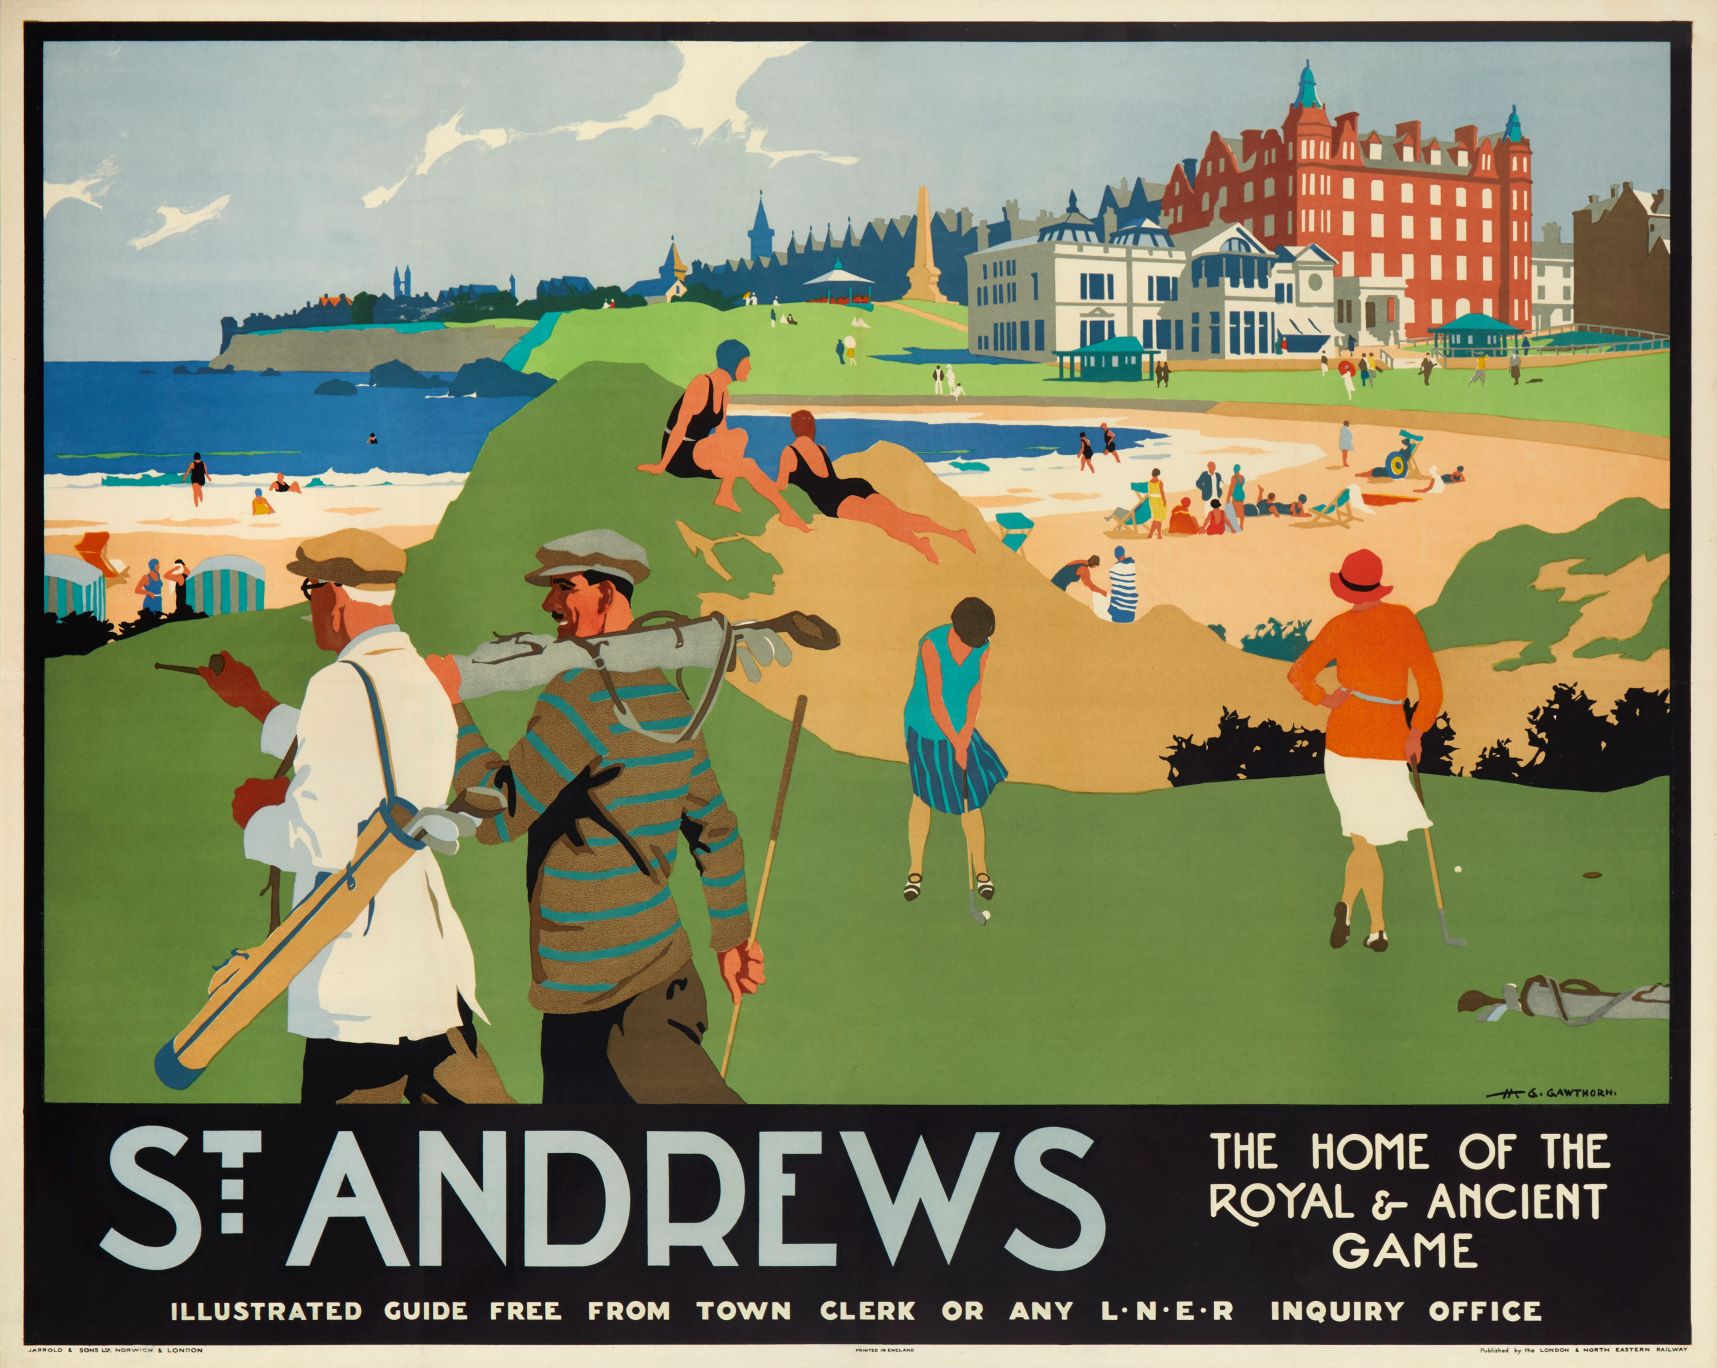 Colourful railway print with people putting on the golf course and lounging on the beach. St Andrews skyline in the distance.